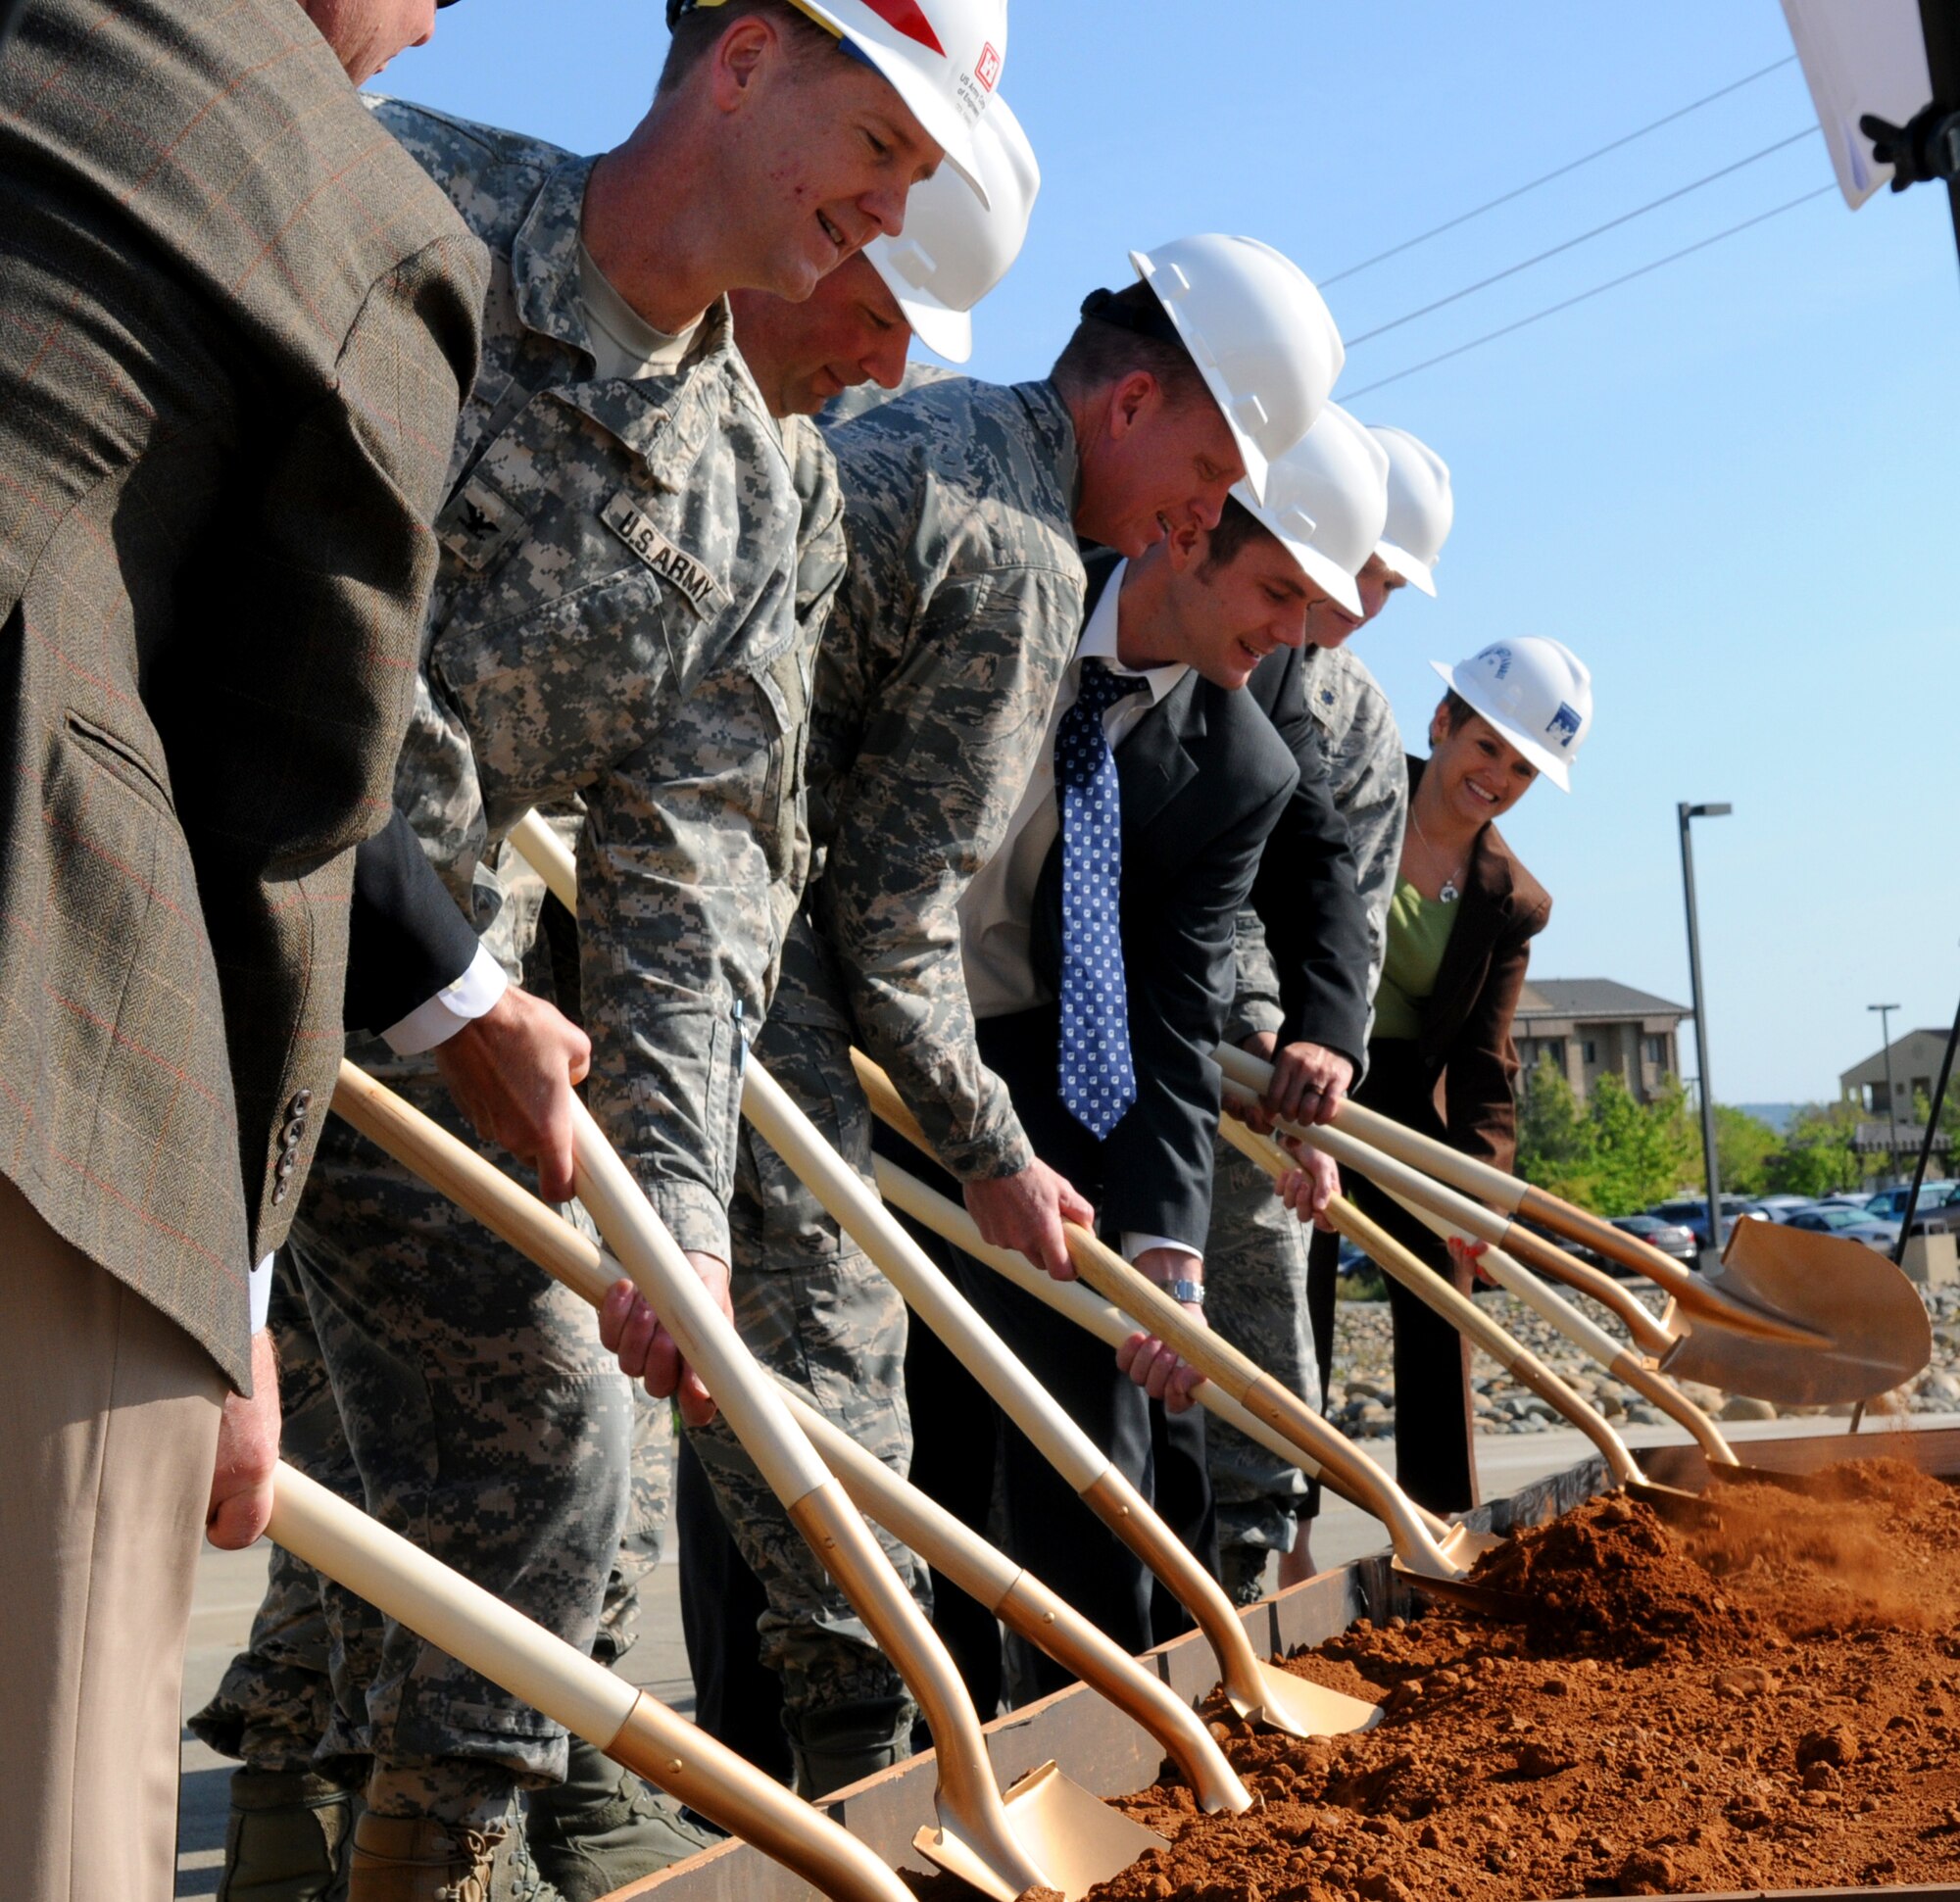 Beale leadership, Congressman John Garamendi representatives, a member of the Army Corps of Engineers, and the facility building contractors break ground for the initiation of construction of the 548th Intelligence, Surveillance, and Reconnaissance Group Distribution Common Ground System Facility at Beale Air Force Base, Calif., April 3, 2015. The DCGS facility is planned to be a two-story 85,000 square foot structure, costing $53.7 million. (U.S. Air Force photo by Airman Preston Cherry/Released)